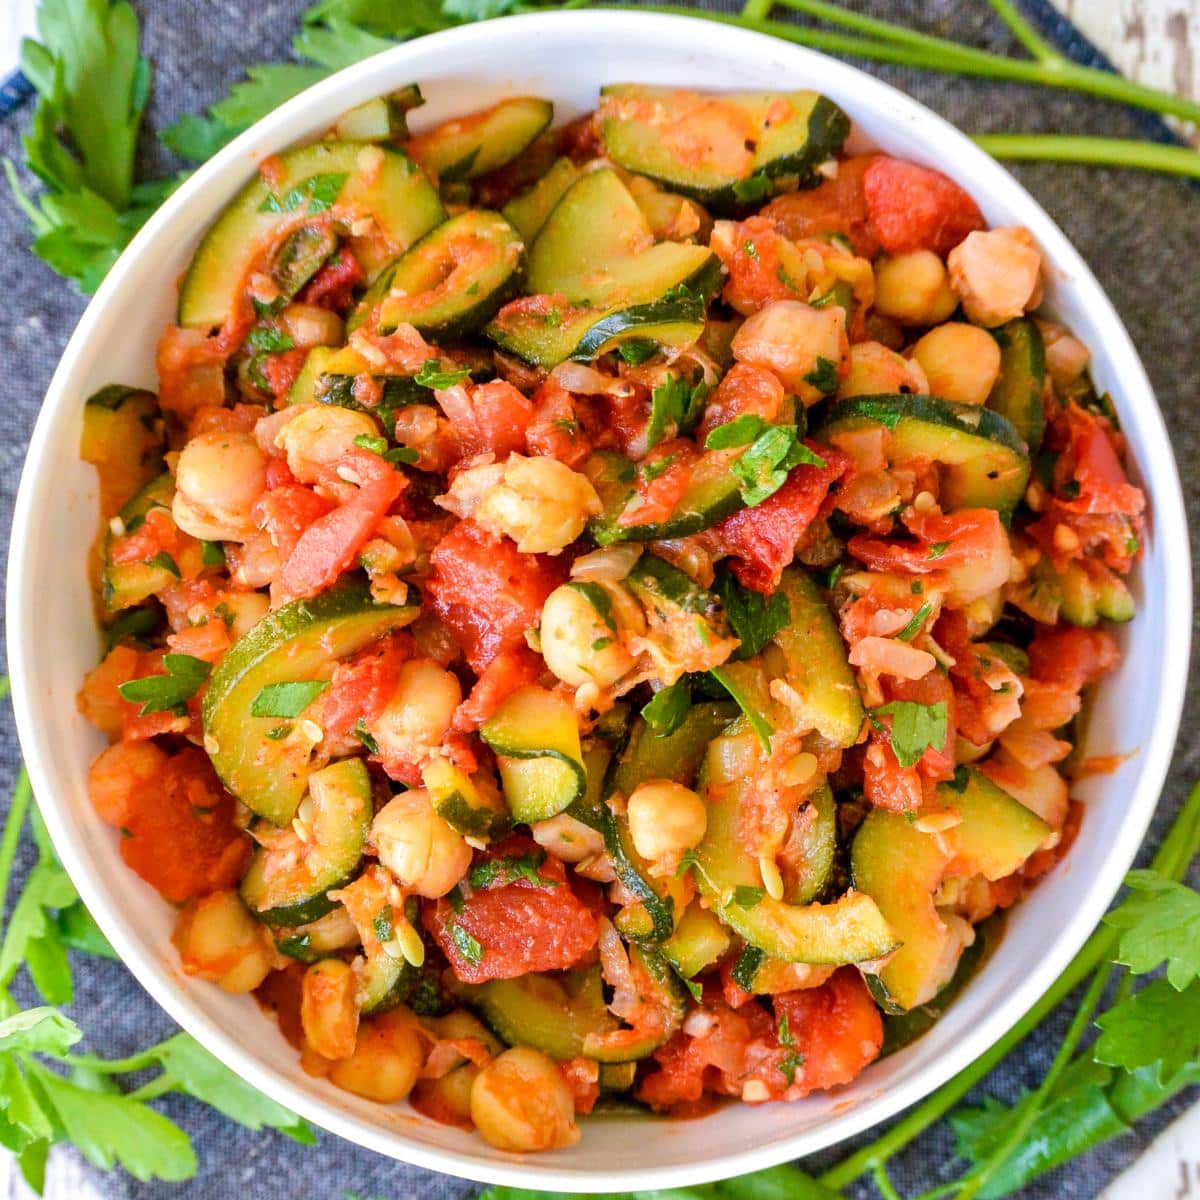 Bowl of Stewed Zucchini and Tomatoes with Chickpeas.